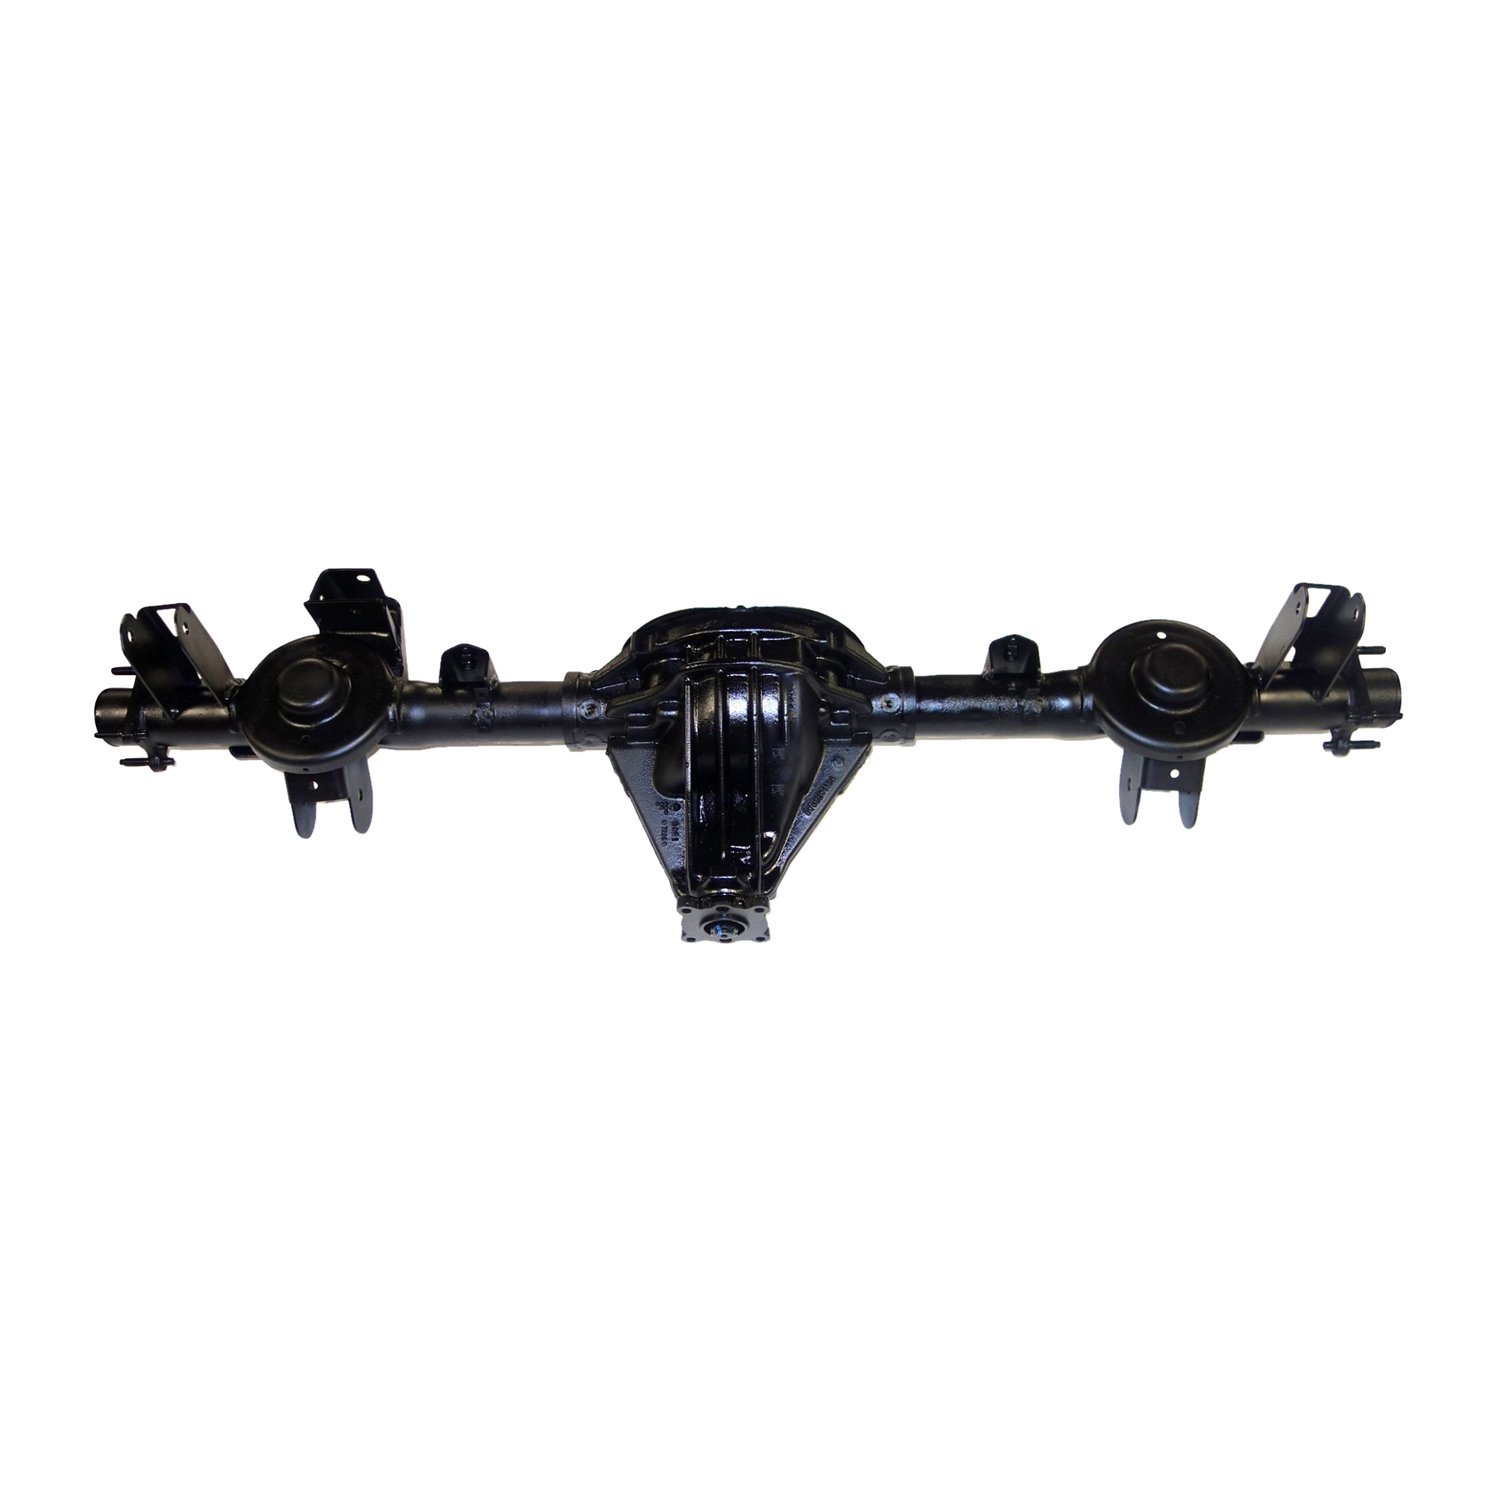 Remanufactured Complete Axle Assy for Chy 8.25" 2005 Liberty 4.11 , 2.4l & 3.7l w/o ABS